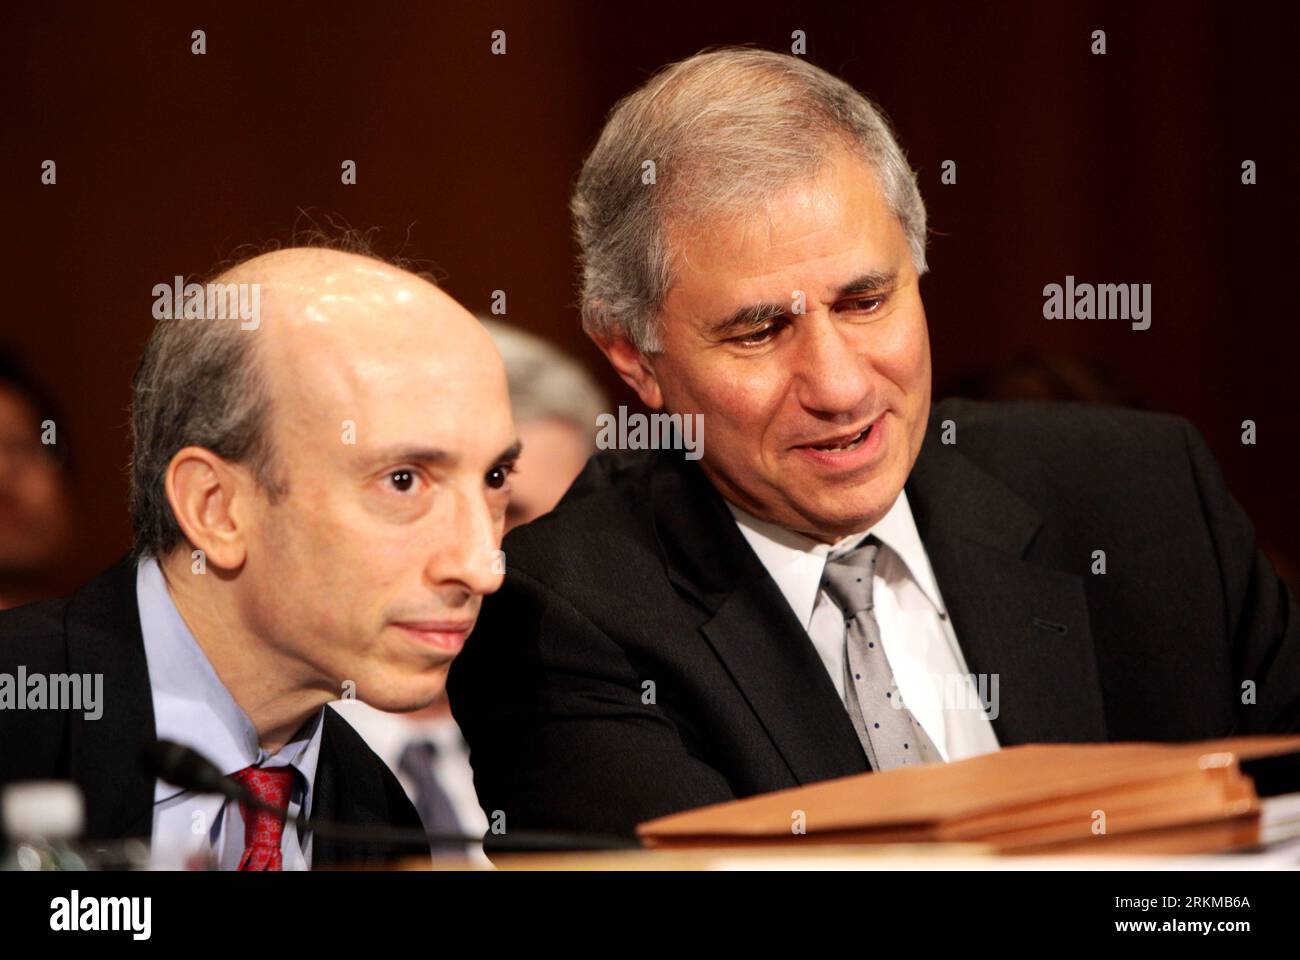 Bildnummer: 56657374  Datum: 06.12.2011  Copyright: imago/Xinhua (111206) -- WASHINGTON, Dec. 6, 2011 (Xinhua) -- Martin Gruenberg (R), acting chairman of the Federal Deposit Insurance Corp. (FDIC), talks with Gary Gensler, chairman of the U.S. Futures Commodities Trading Commission (CFTC) during a Senate Banking Committee hearing in Washington, D.C., the United States, Dec. 6, 2011. While the United States has made much progress in the implementation of the Dodd-Frank Act, there is still much work left to strengthen financial regulation after the world s largest economy was hit seriously by t Stock Photo